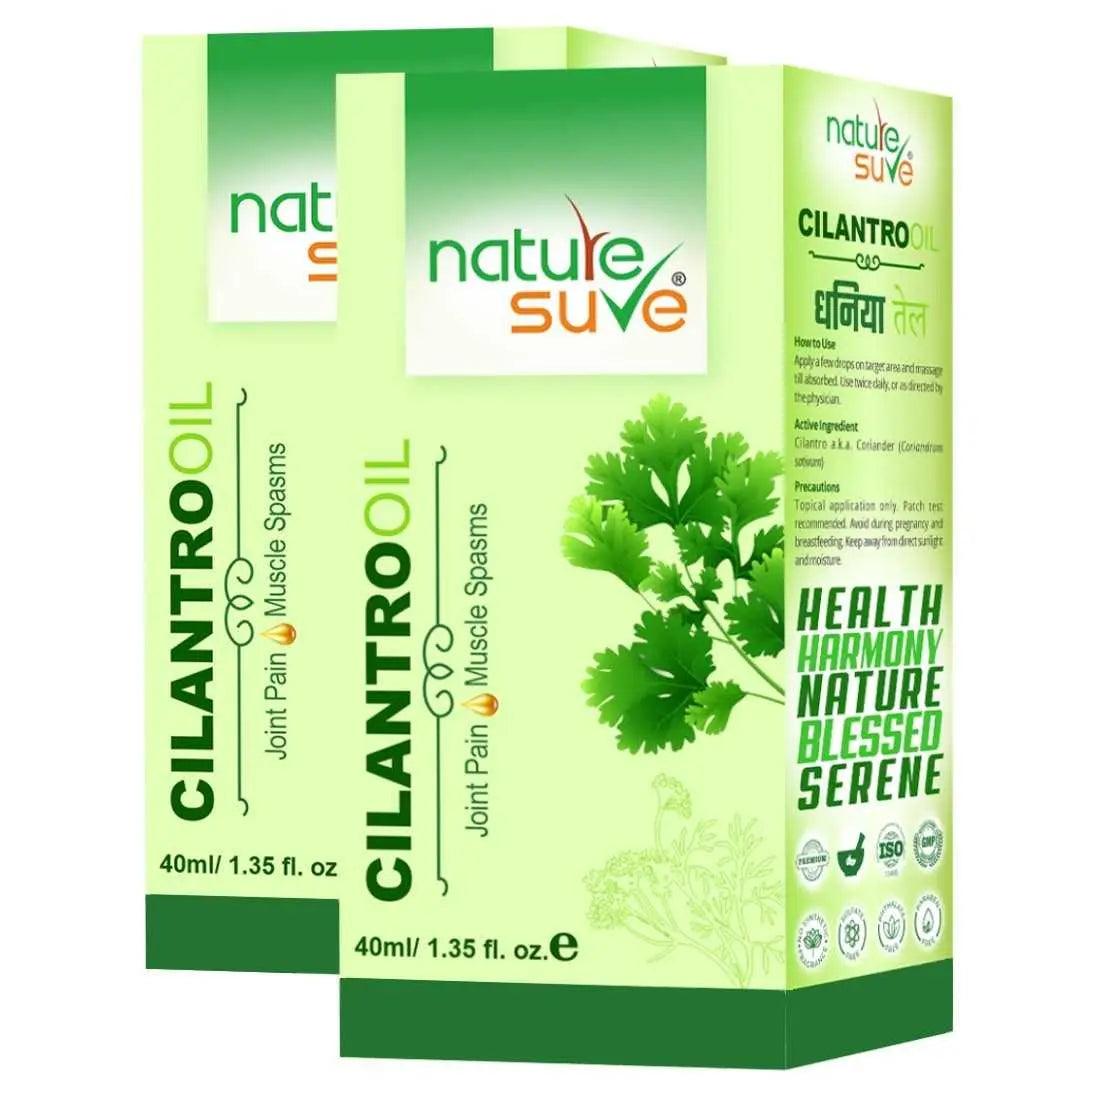 Nature Sure Cilantro Dhania Oil for Joint Pain and Muscle Spasms in Men & Women - 40ml 7419870708962